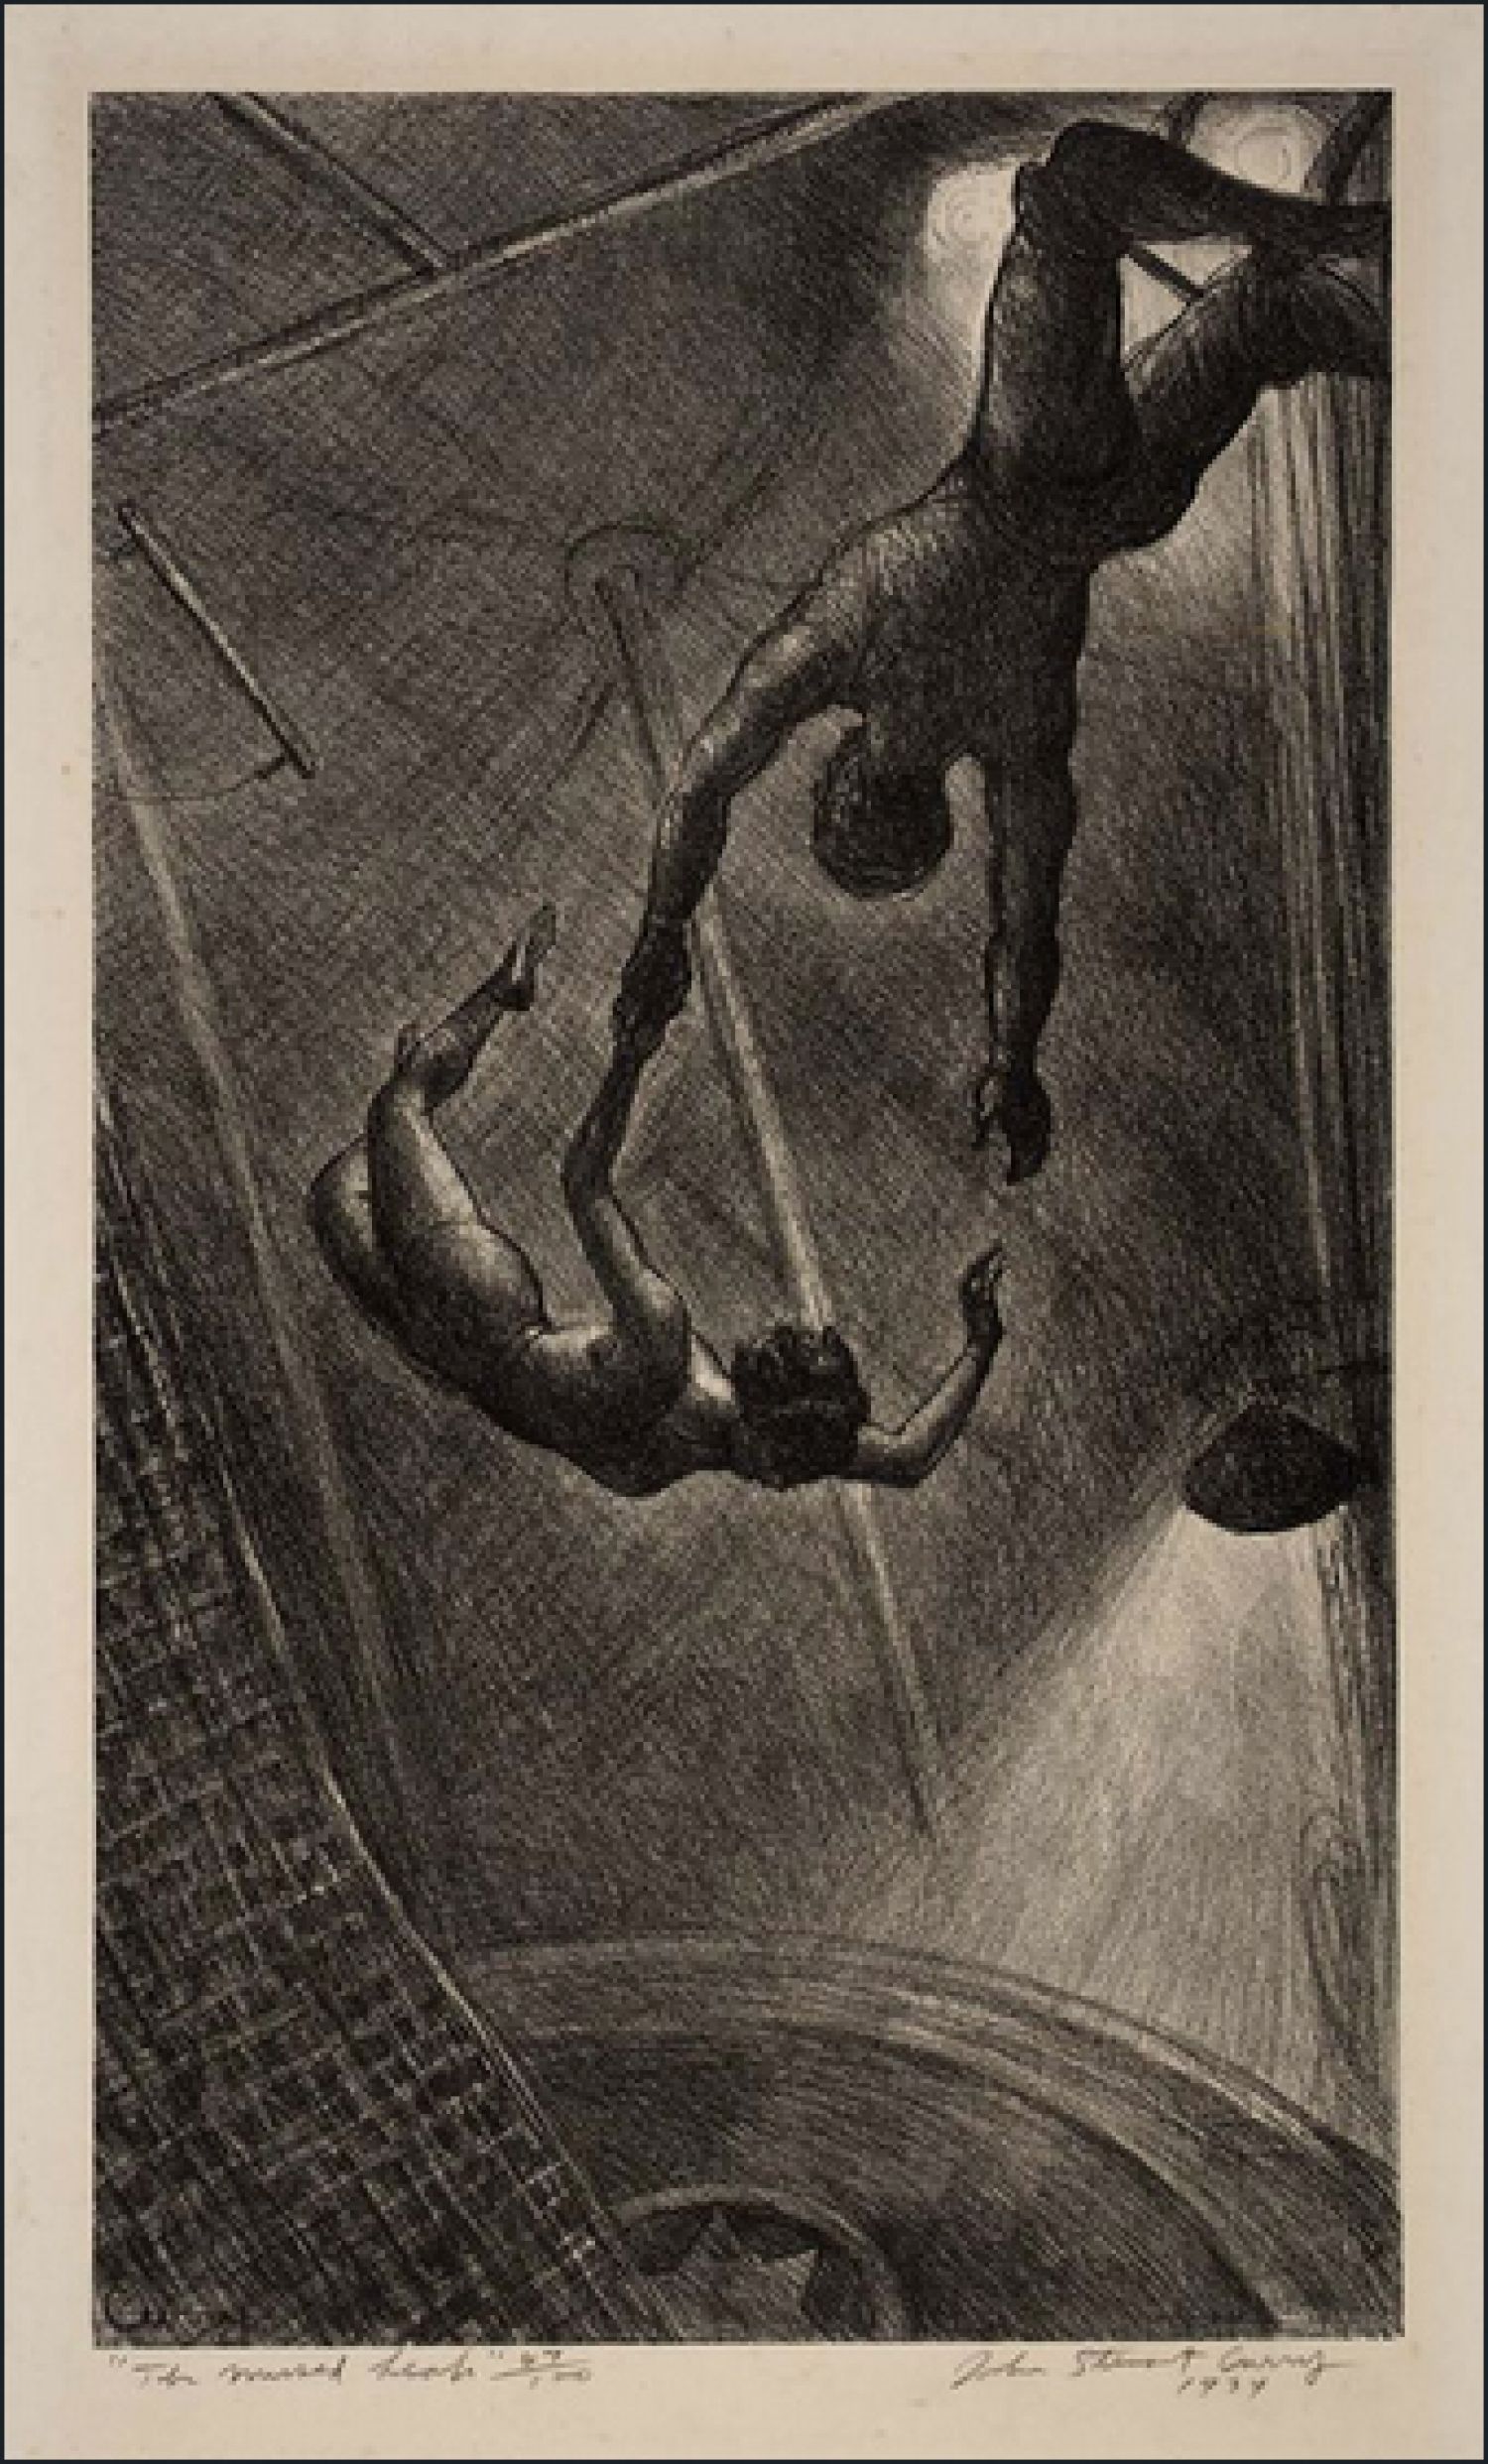 John Steuart Curry, «The Missed Leap», 1934